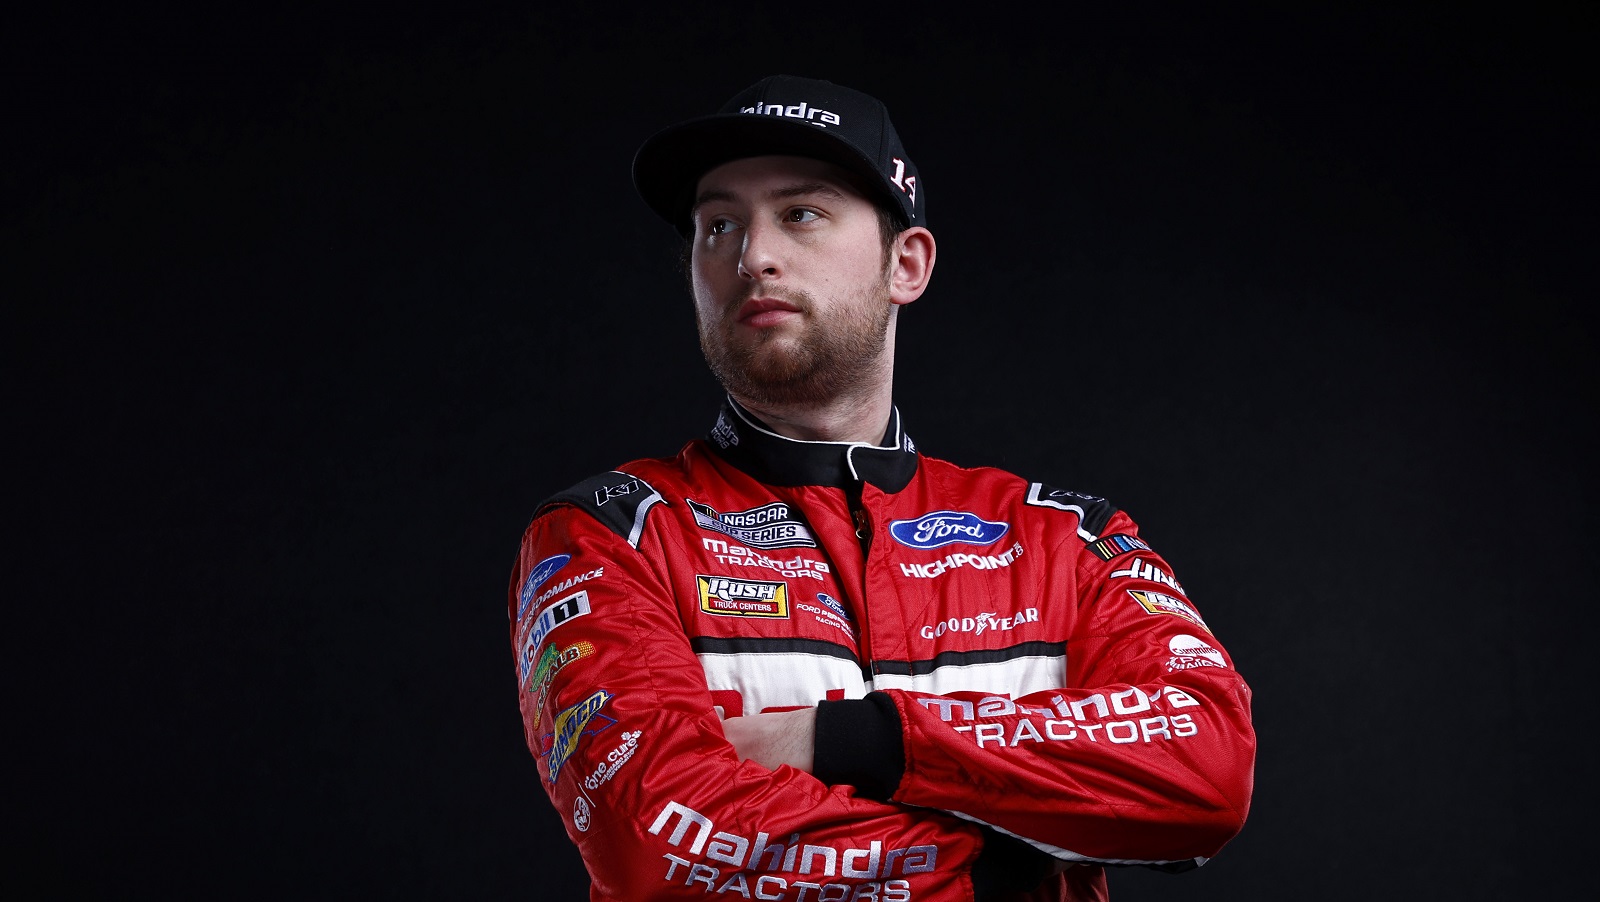 Chase Briscoe of Stewart-Haas Racing in the Cup Series poses for a photo during NASCAR Production Days on Jan. 19, 2022.